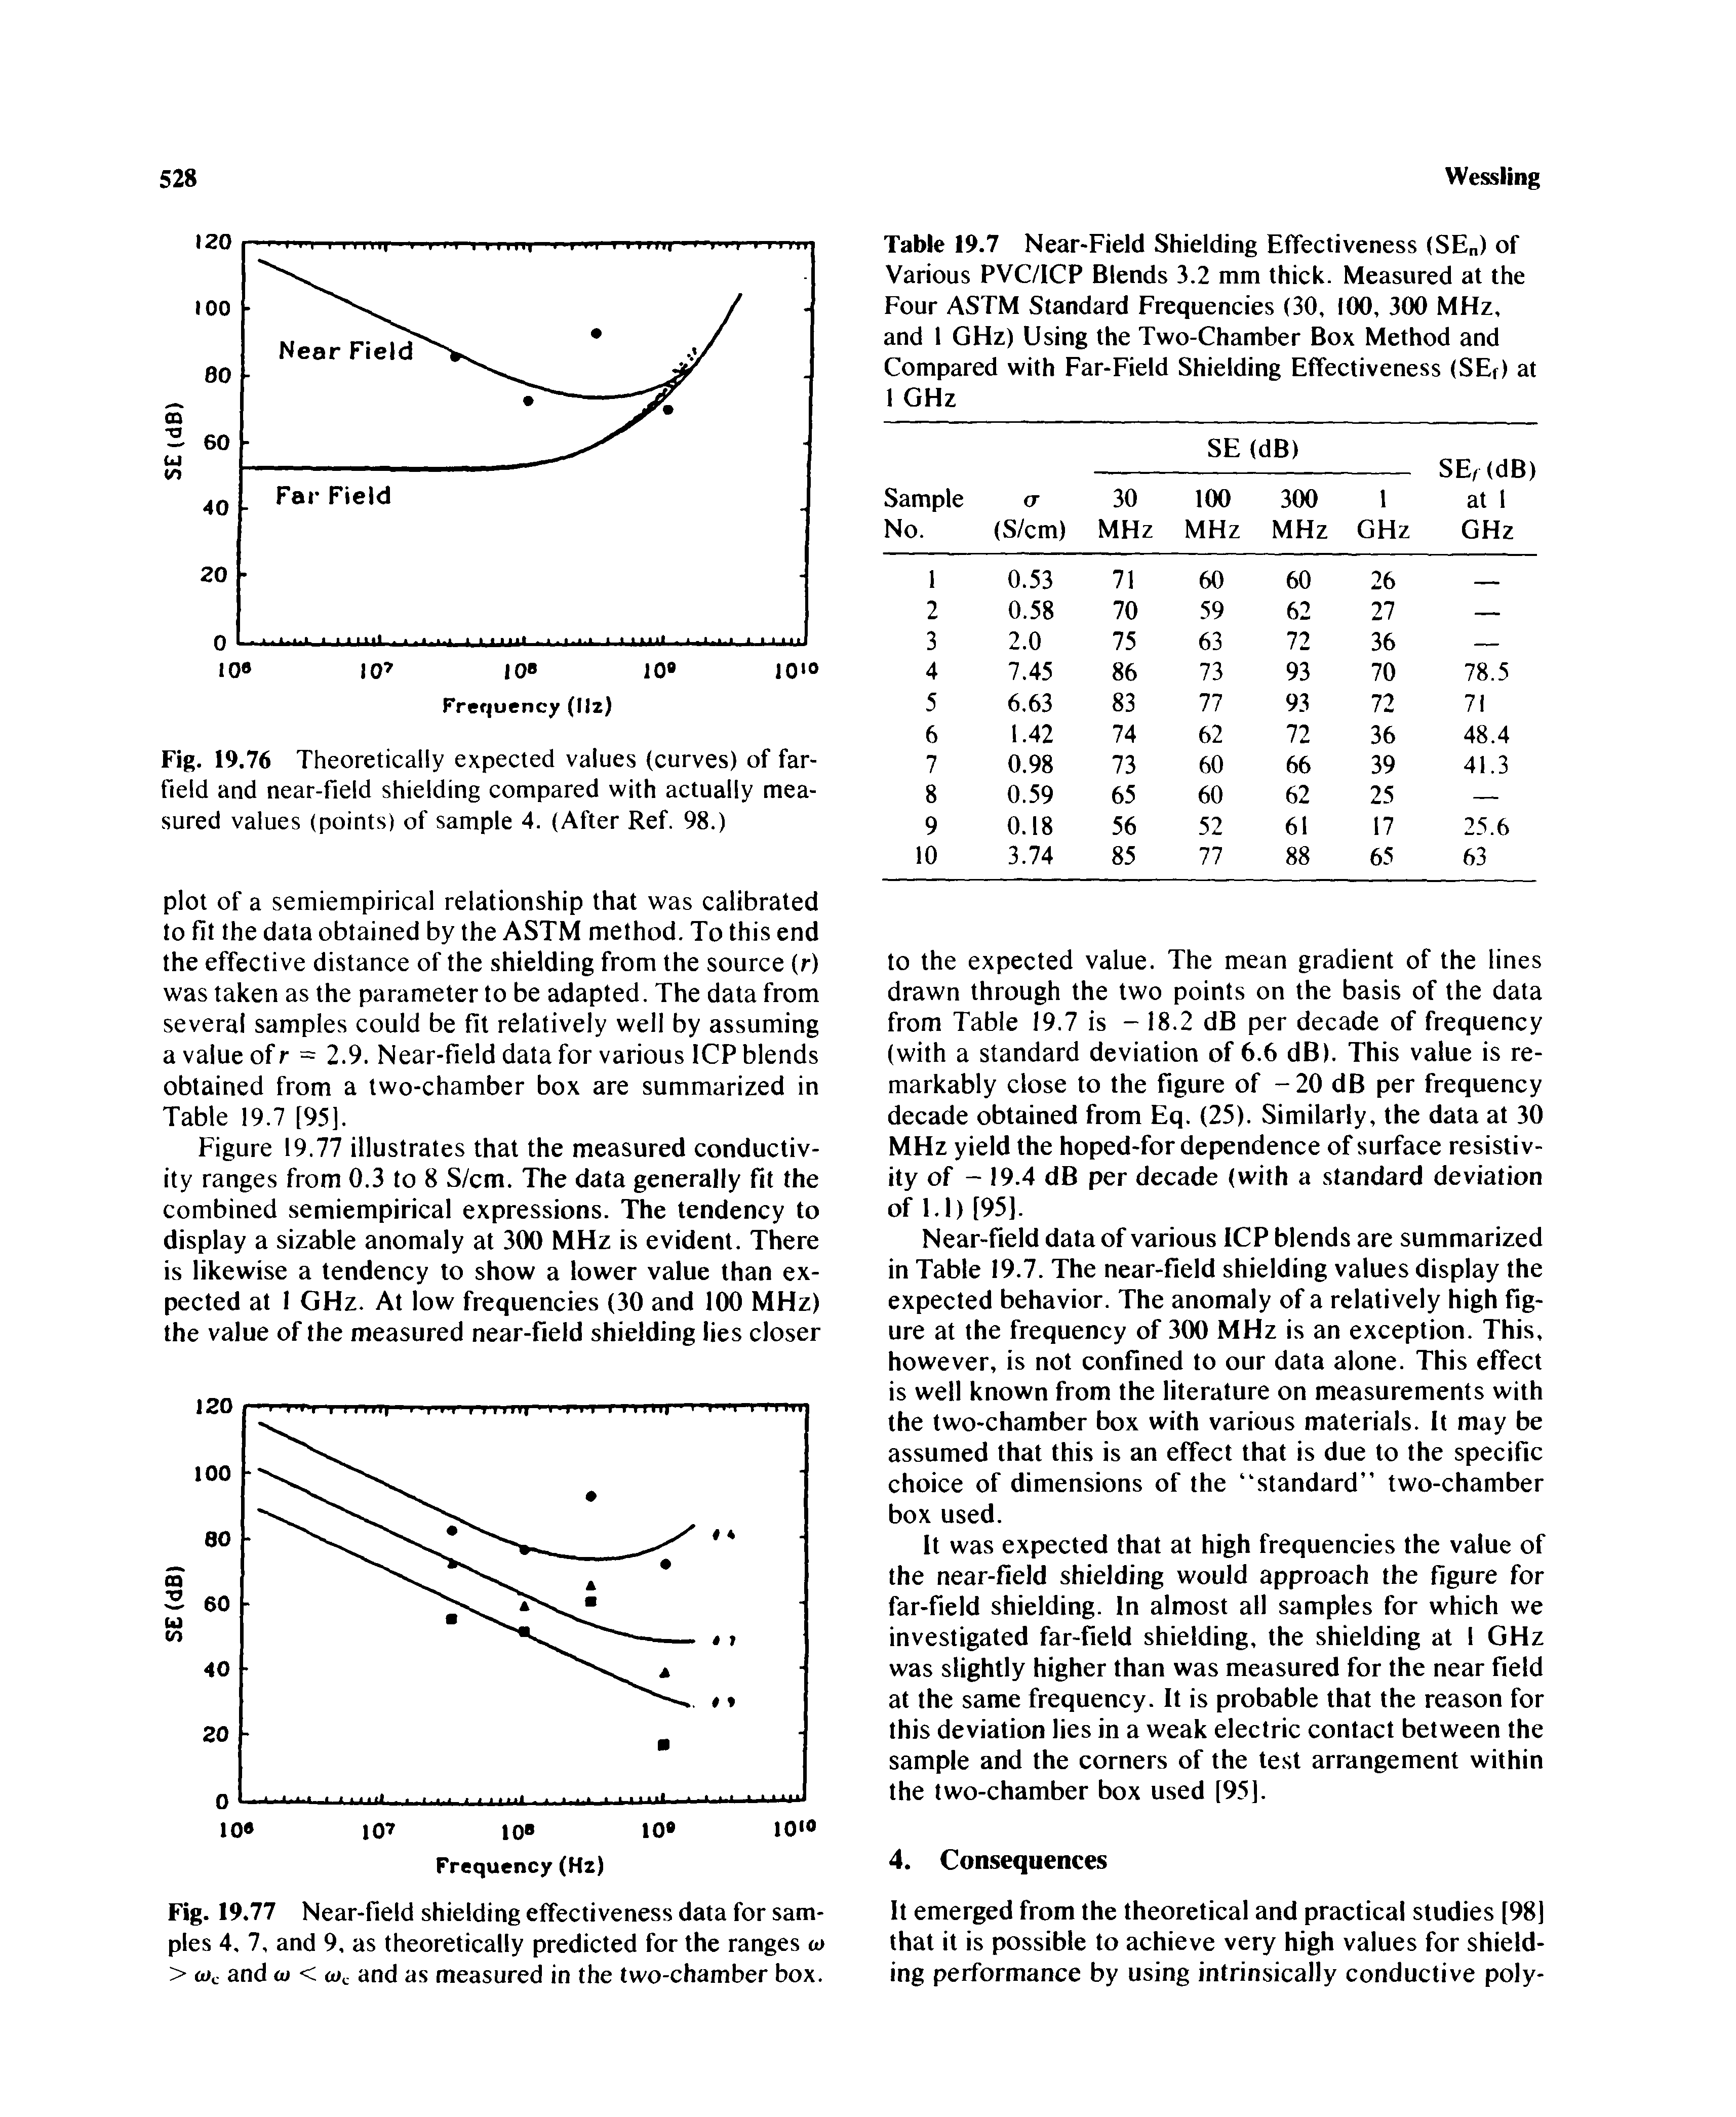 Fig. 19.77 Near-field shielding effectiveness data for samples 4, 7, and 9, as theoretically predicted for the ranges o> > Wc and (o < (o and as measured in the two-chamber box.